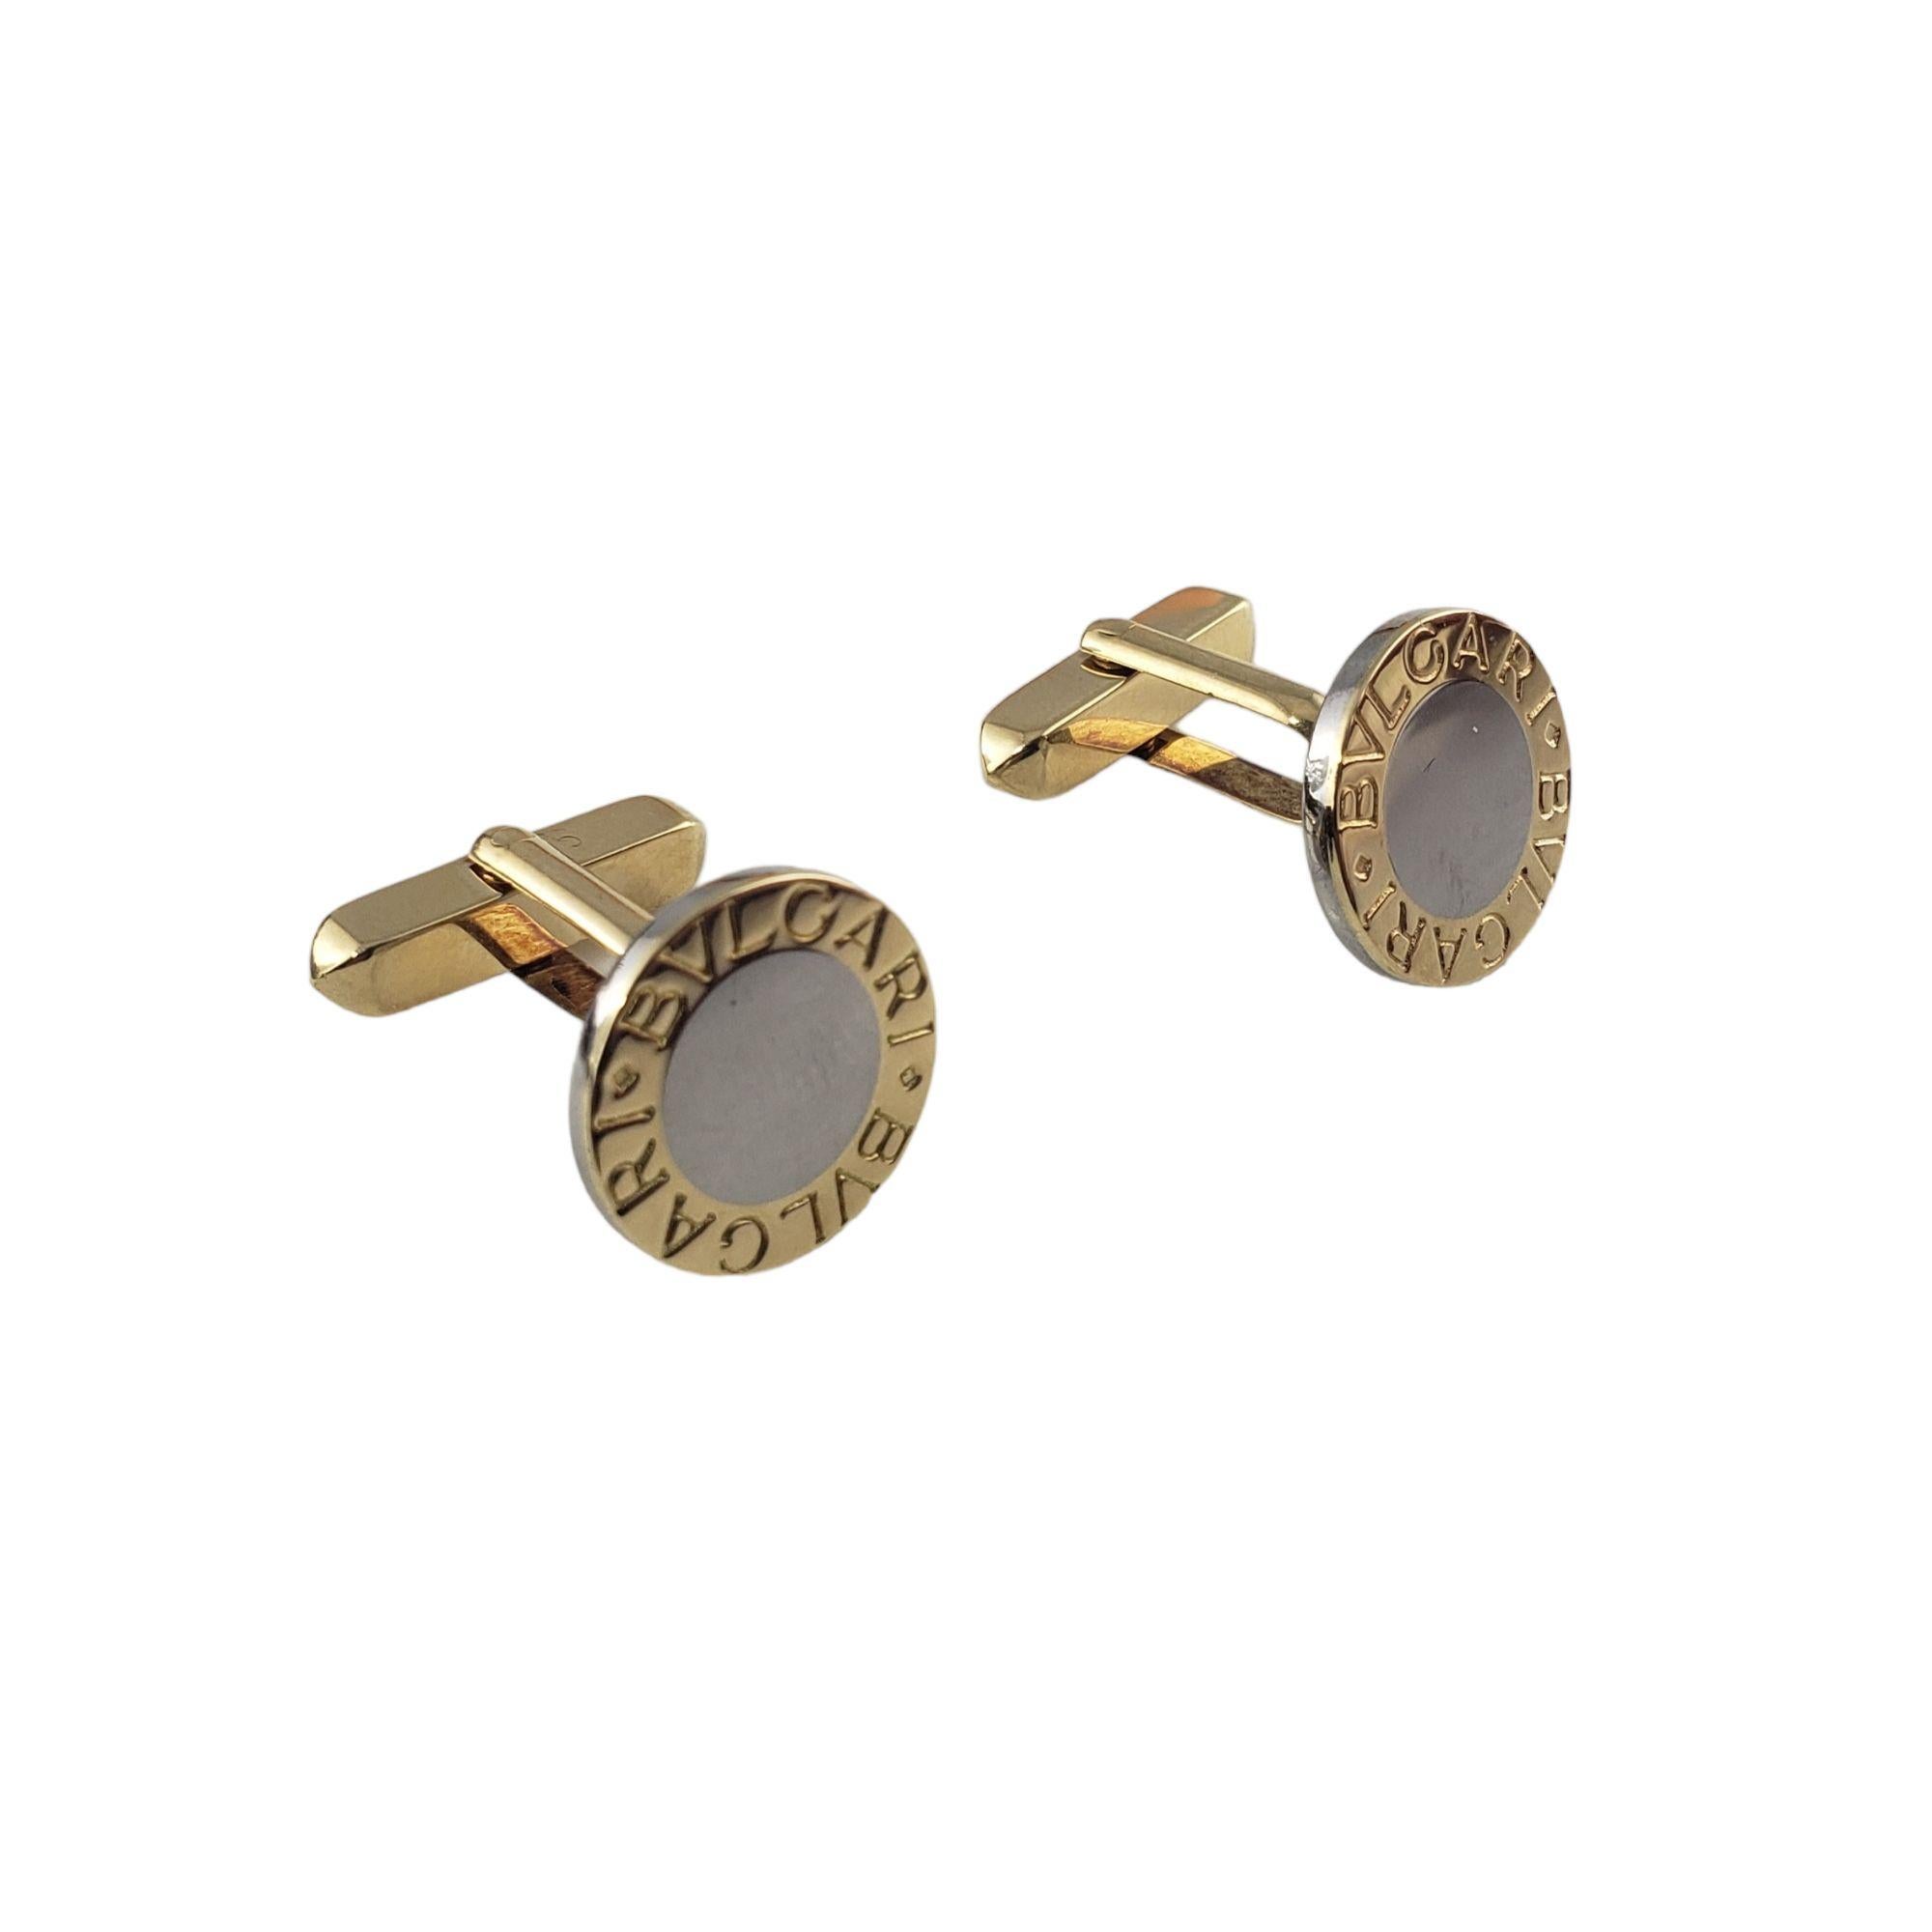 Bvlgari 18 Karat Yellow Gold and Stainless Steel Cufflinks In Good Condition For Sale In Washington Depot, CT